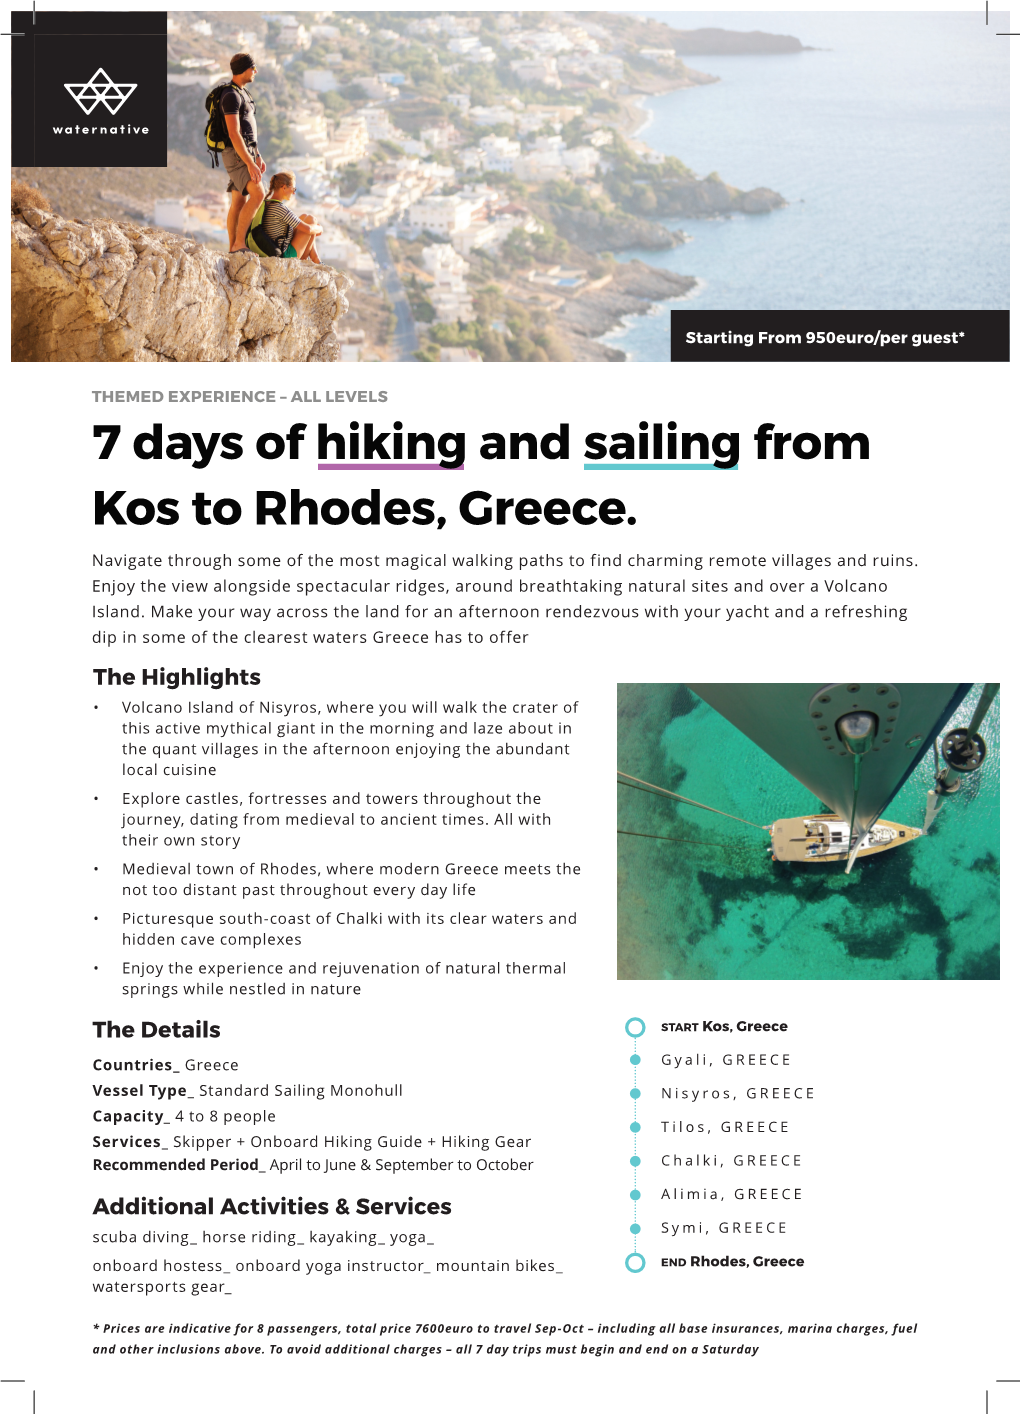 7 Days of Hiking and Sailing from Kos to Rhodes, Greece. Navigate Through Some of the Most Magical Walking Paths to Find Charming Remote Villages and Ruins